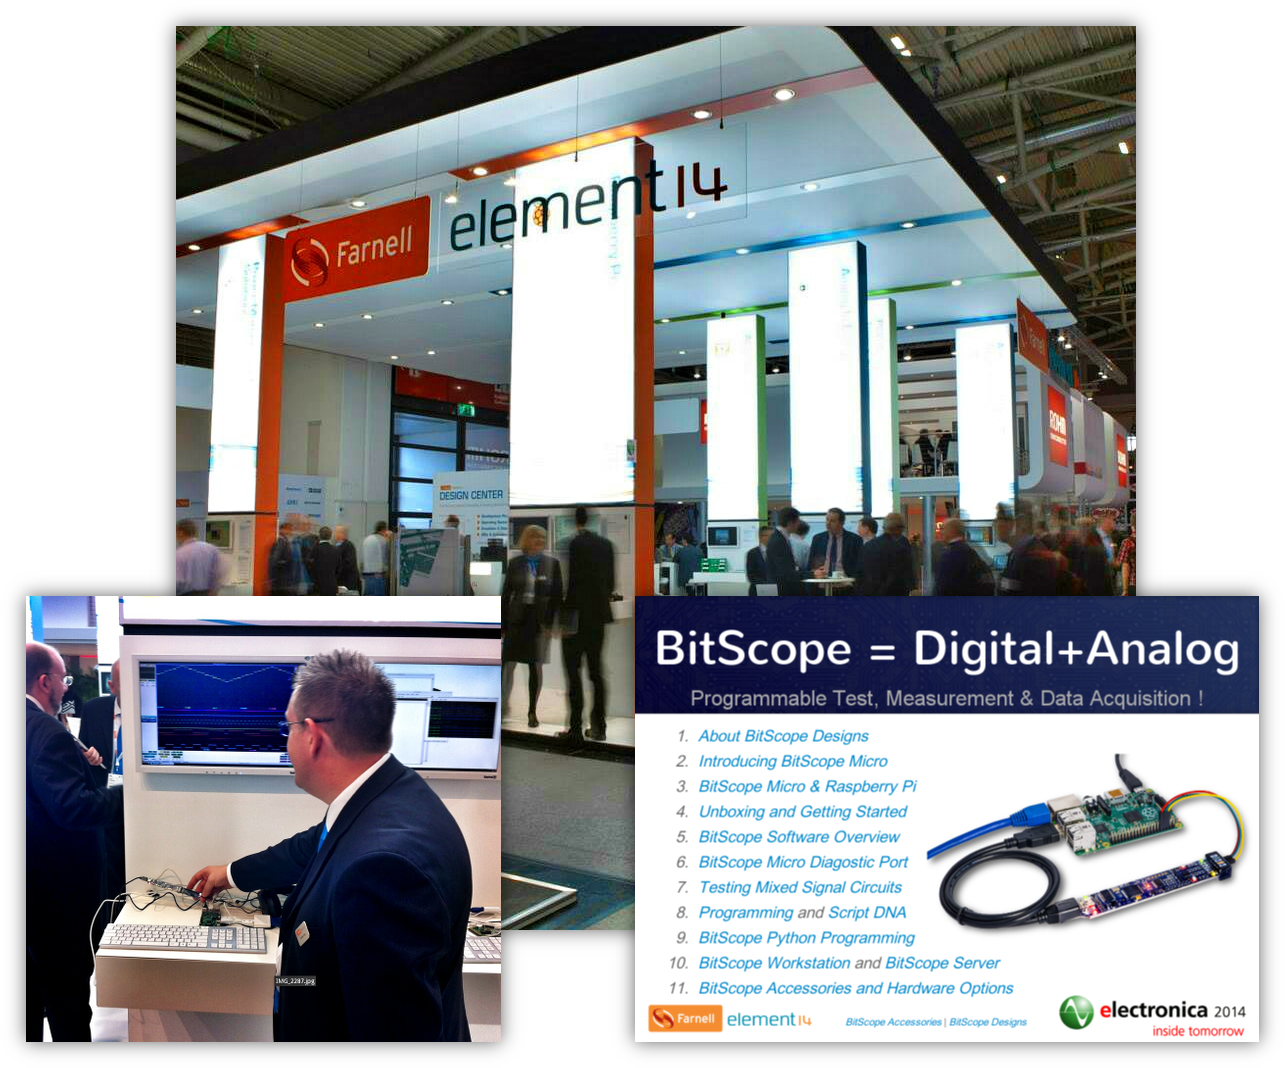 BitScope Micro at electronic 2014 with Farnell element14